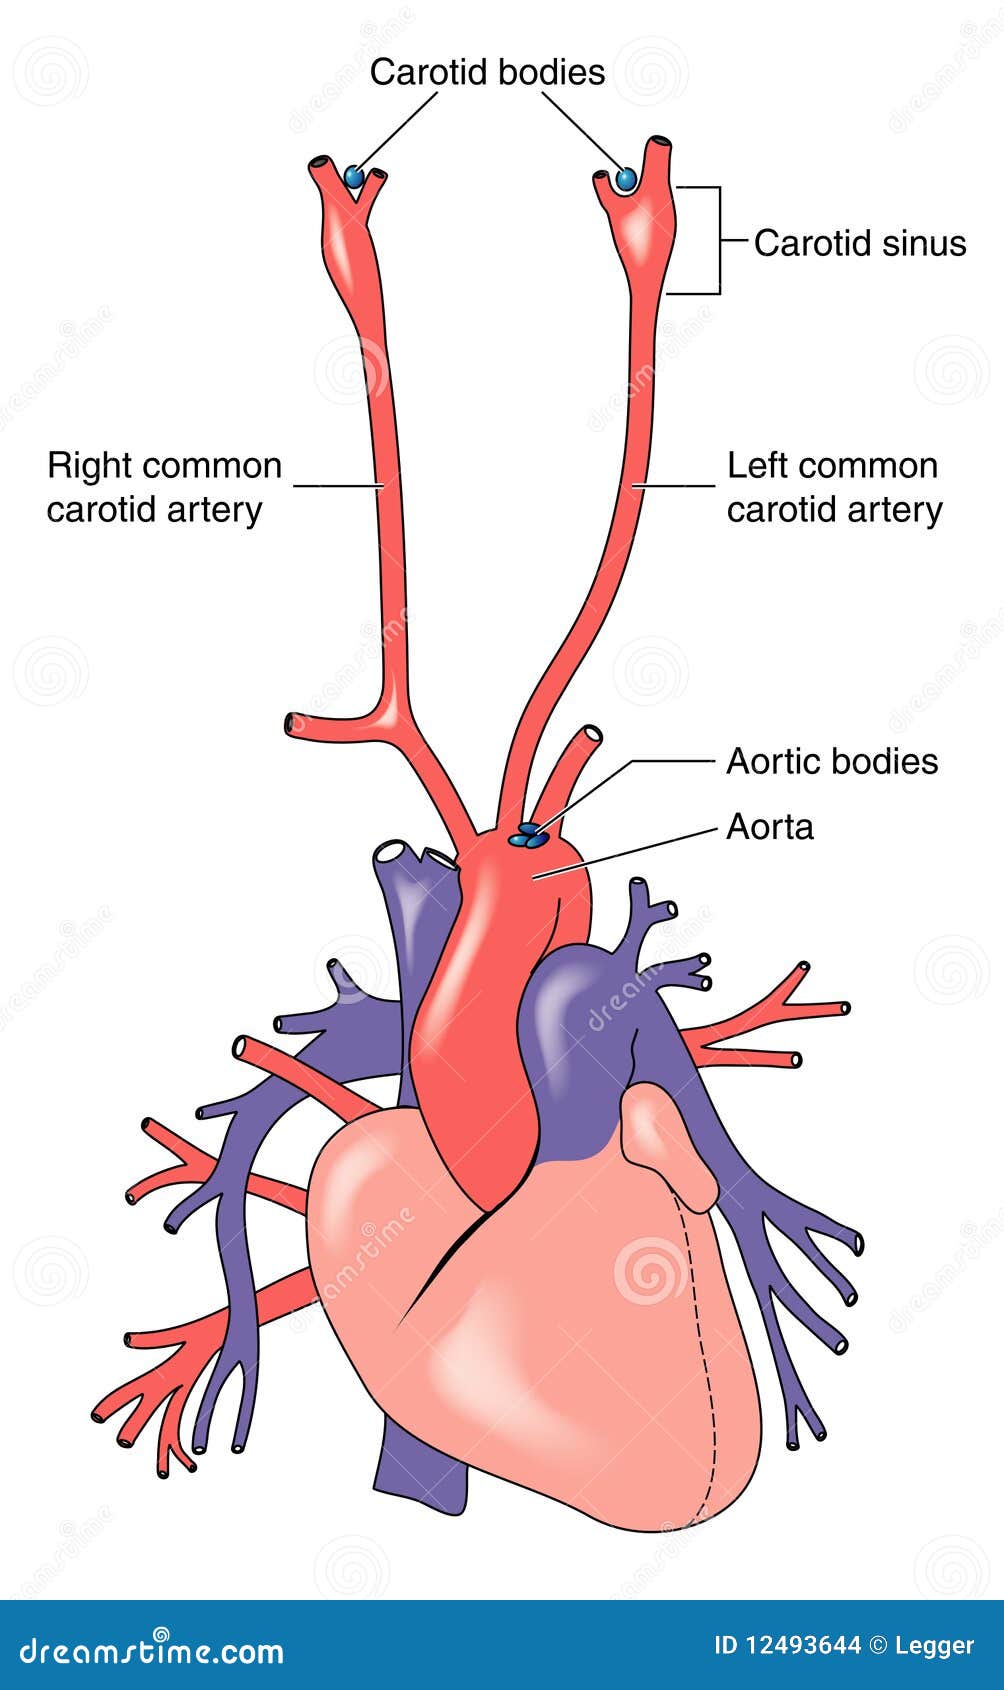 carotid and aortic bodies